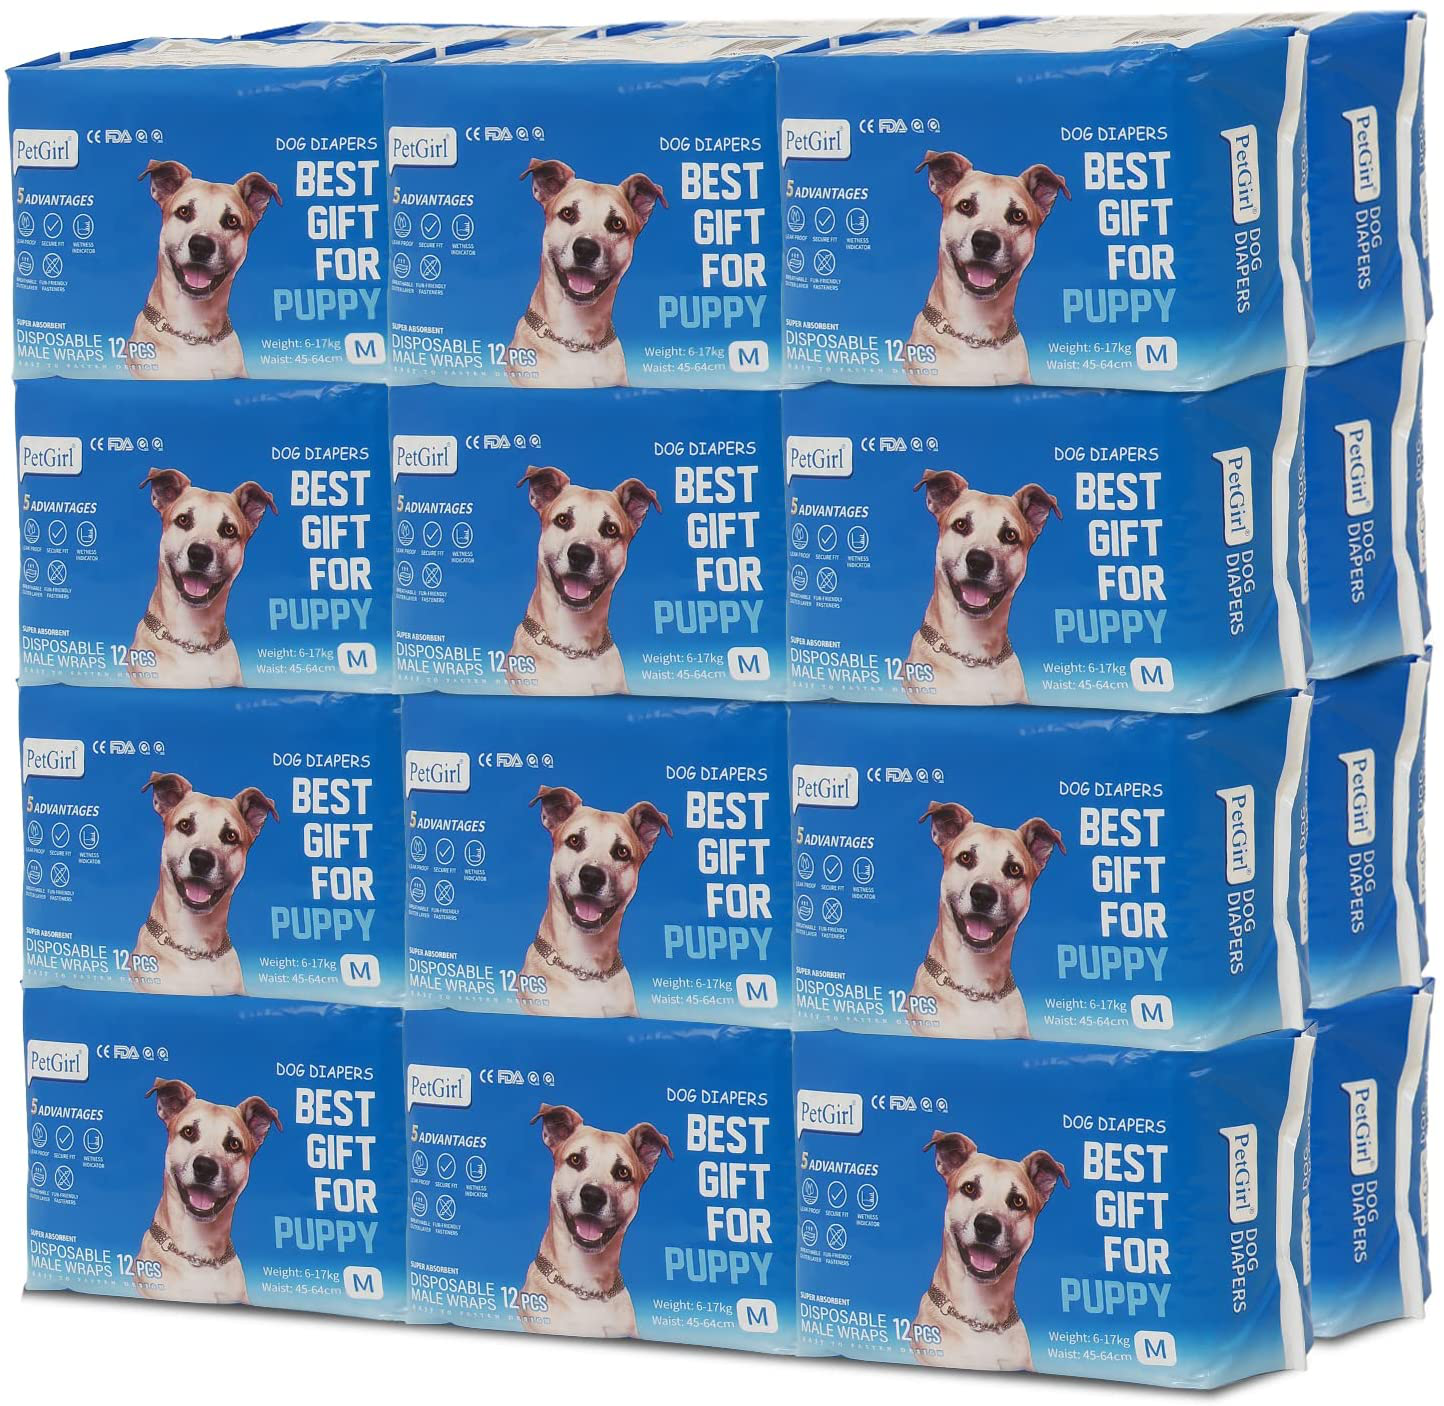 SHAREWIN Male Dog Diapers 12-288PCS Disposable Wraps&Doggie Physiological Pants Pet Diaper Paper| Excitable Urination, Incontinence, or Male Marking